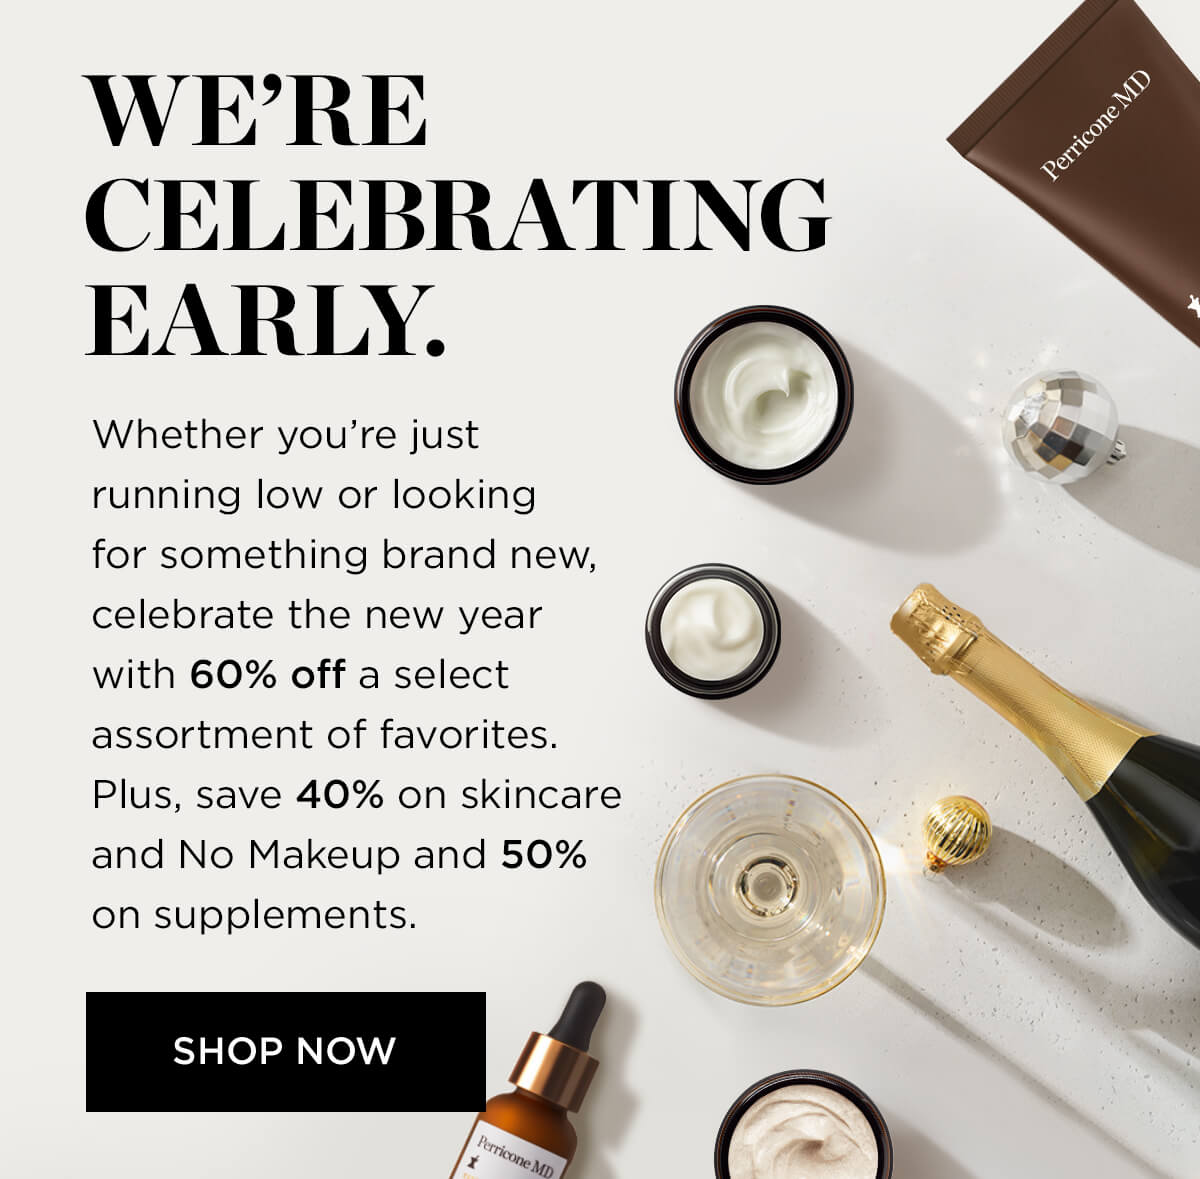  WERE CELEBRATIN G EARLY. Whether youre just running low or looking for something brand new, celebrate the new year with 60% off a select assortment of favorites. Plus, save 40% on skincare and No Makeup and 50% on supplements. 